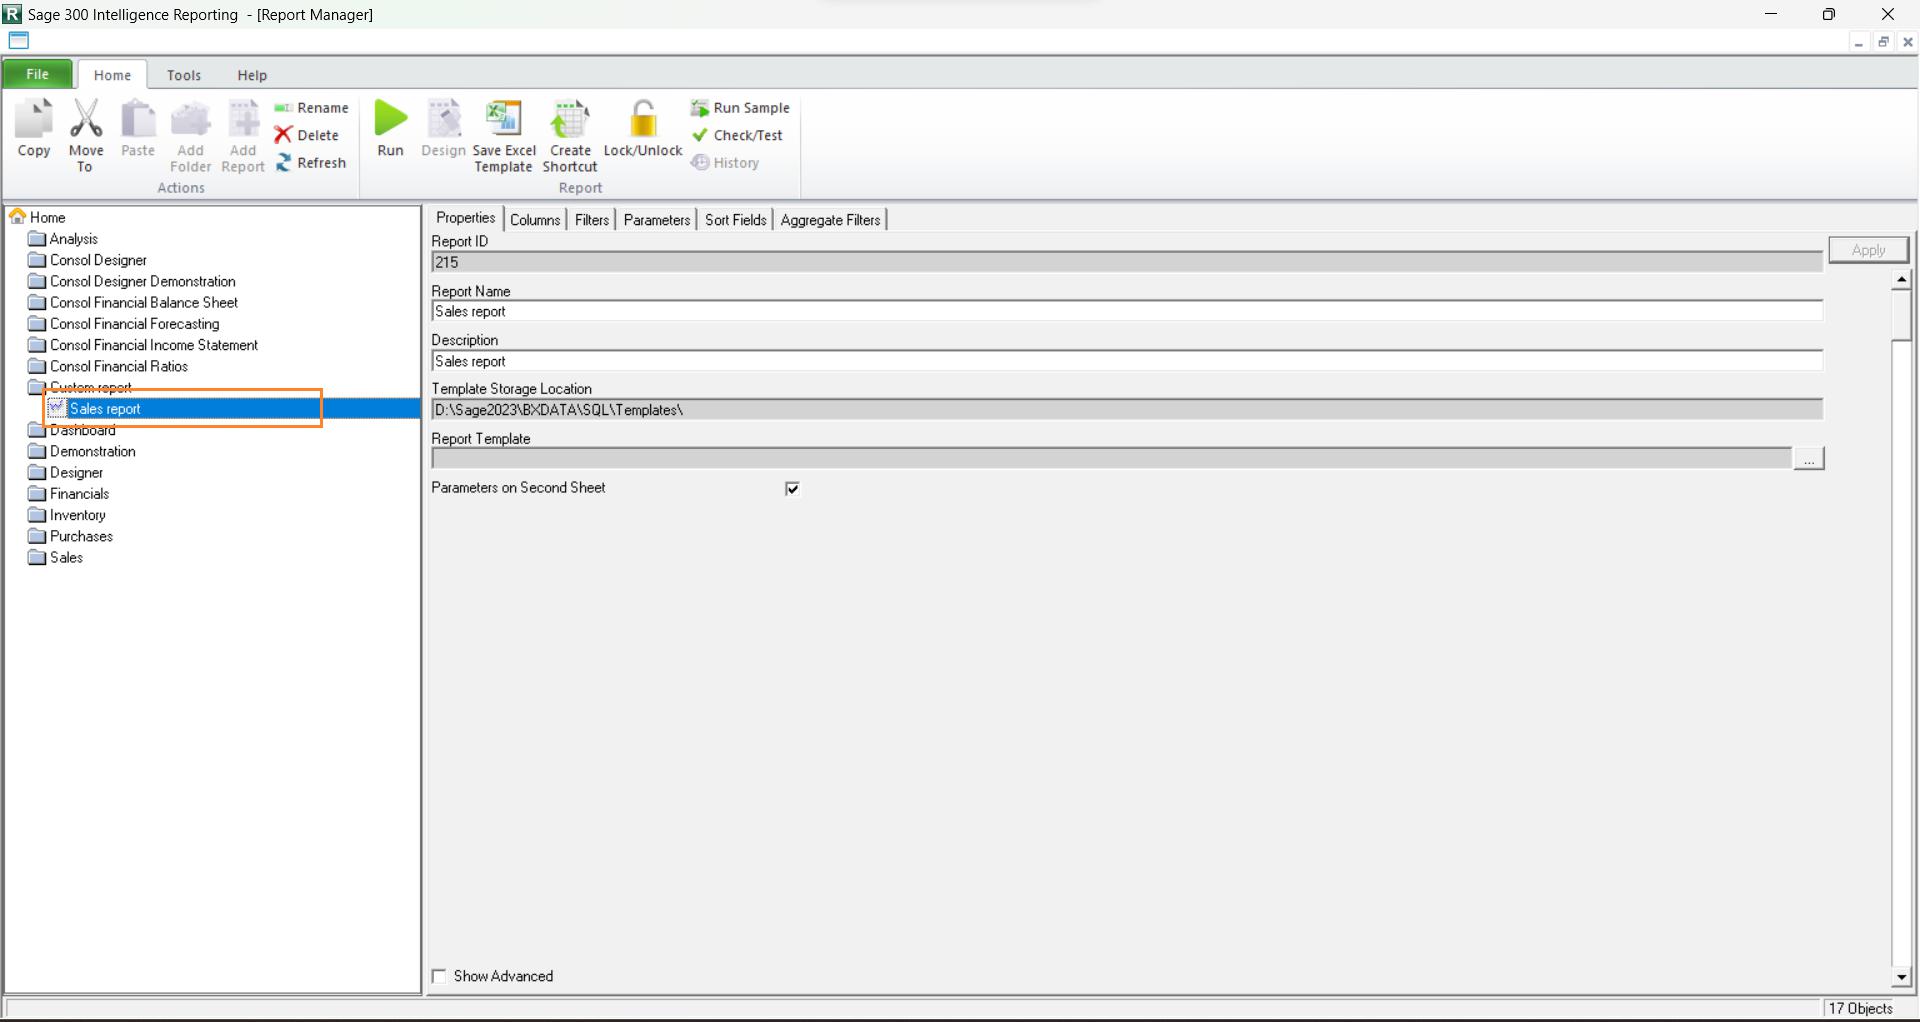 Report Manager Screen in Sage 300